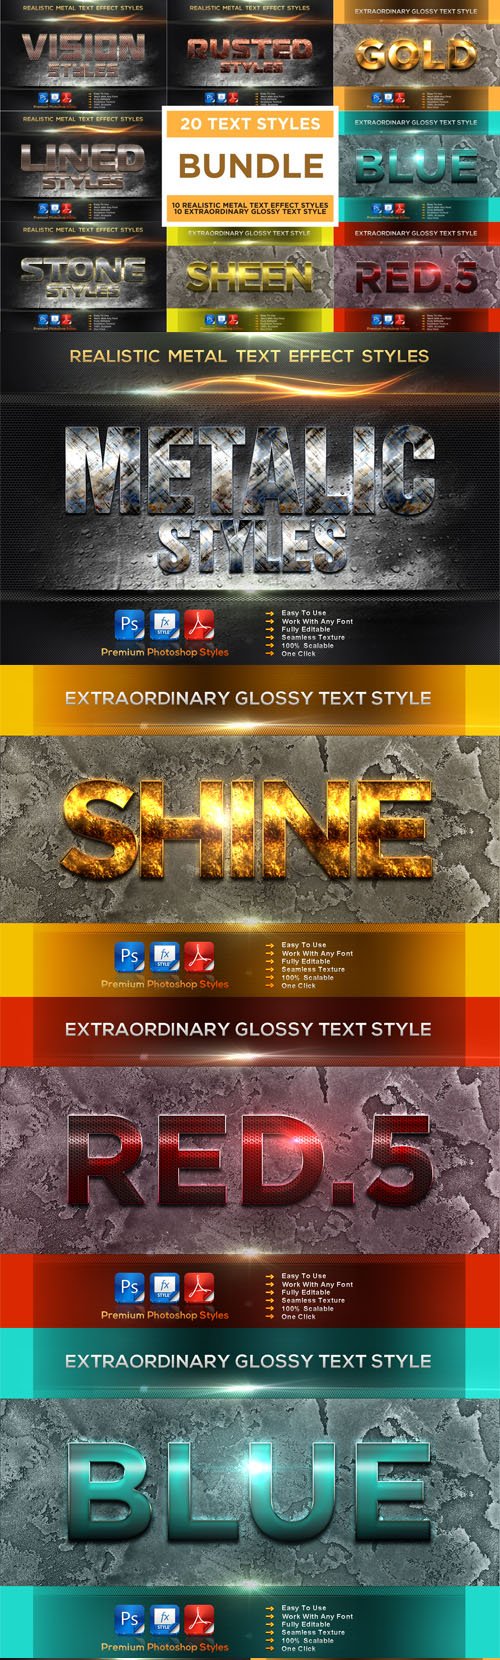 Download Metal Extraordinary Glossy Text Effect Styles Bundle Photoshop Actions Styles Free Psd Templates